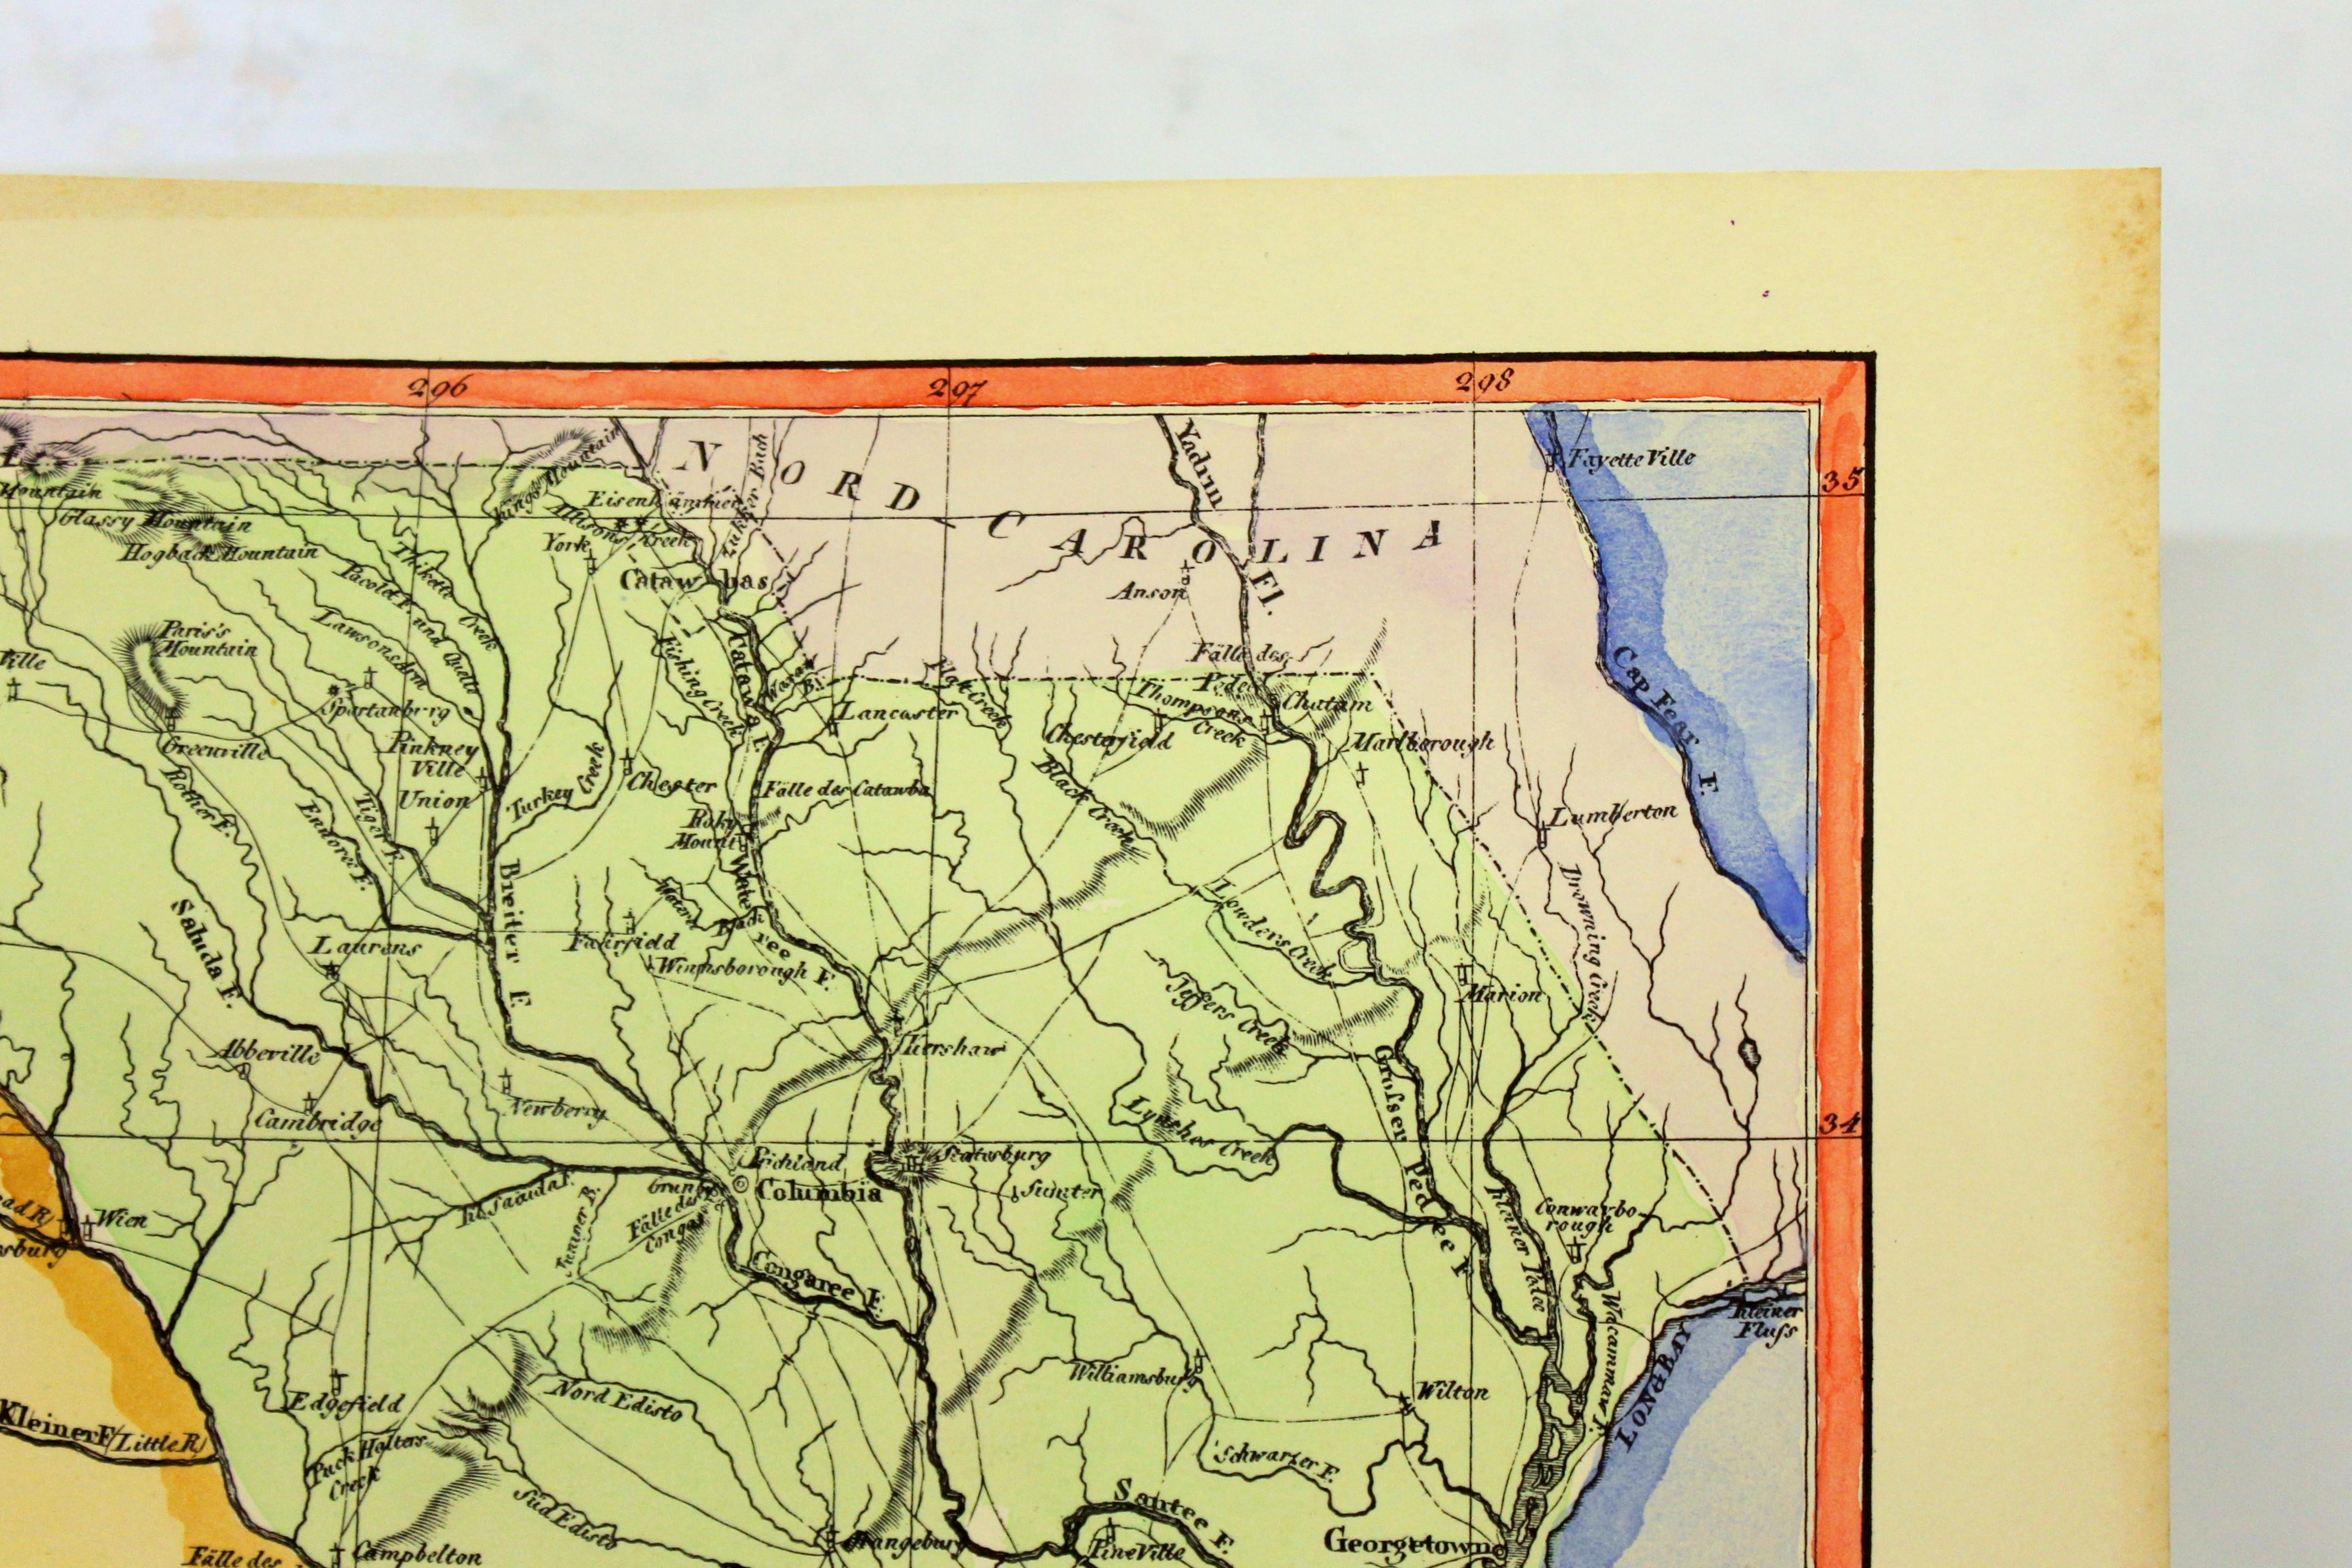 Very fine old reproduction handcolored Map of Sud Carolina (South Carolina), the original from an early 19th century original by J. Drayton's Charte (1803) and the German Geographical Institute (Weimar) in 1806 and more recently re-printed, circa